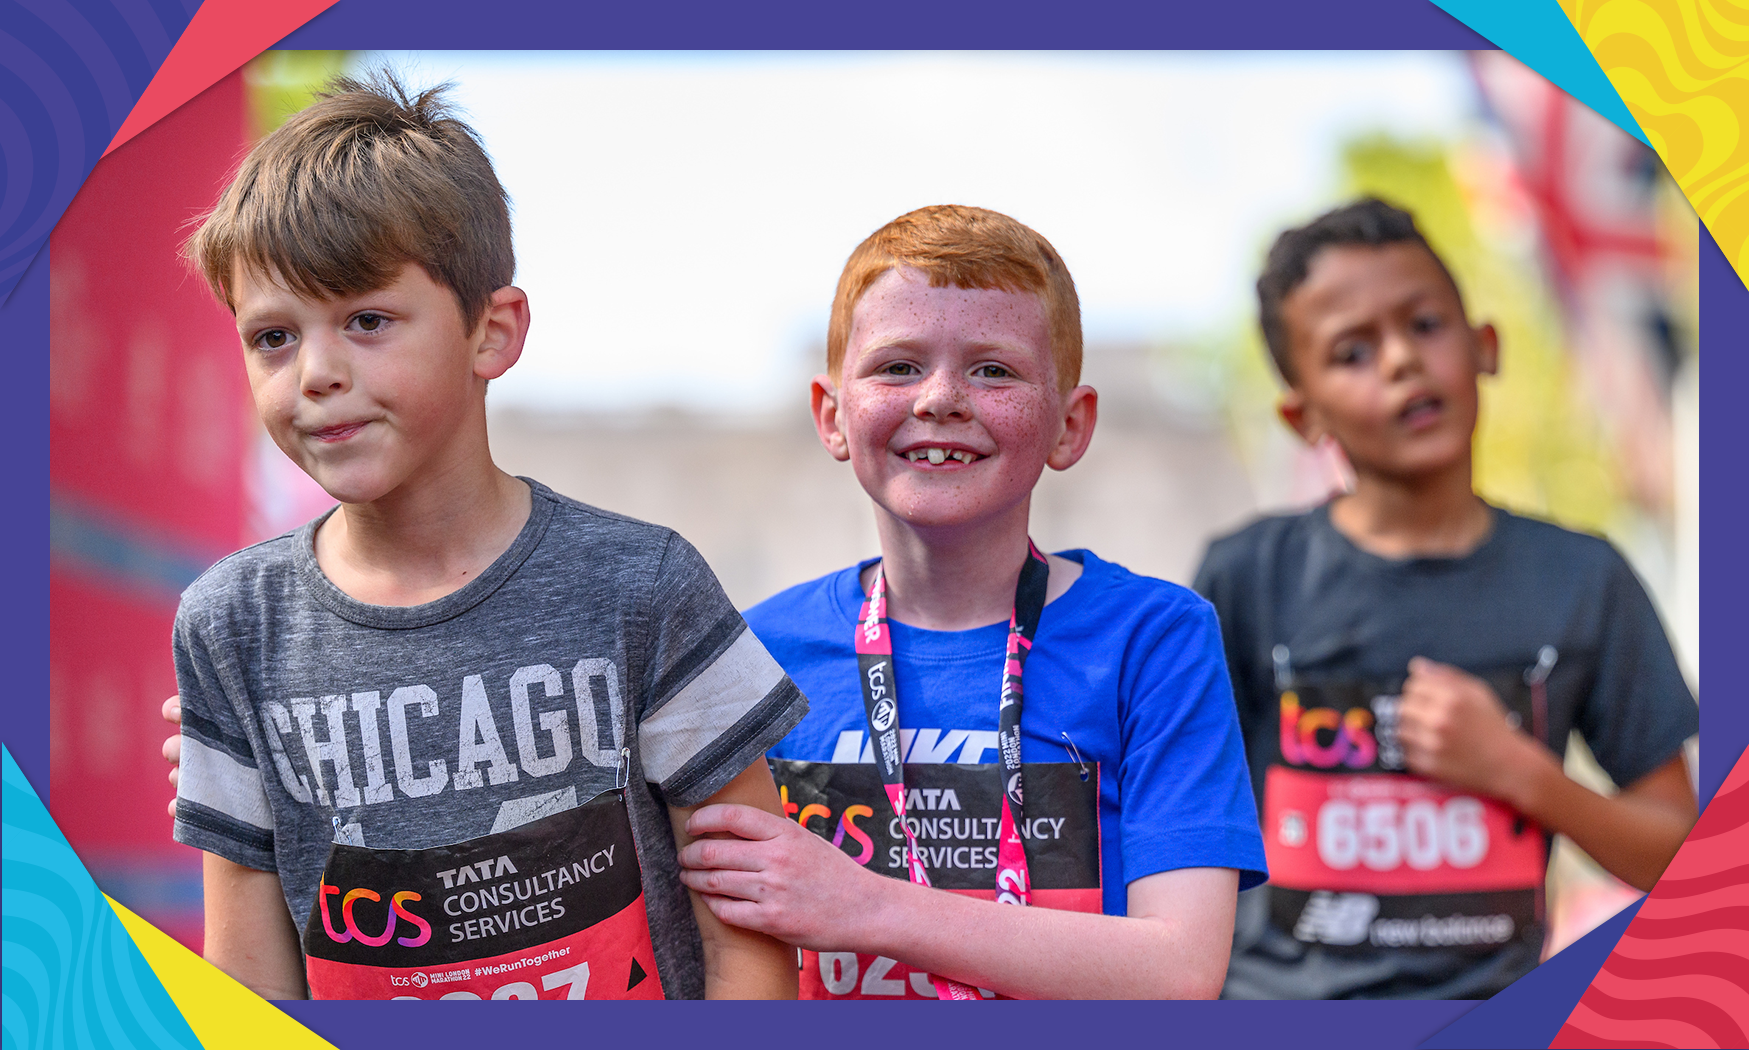 Week 4 of TCS Mini London Marathon in schools: are you taking part?